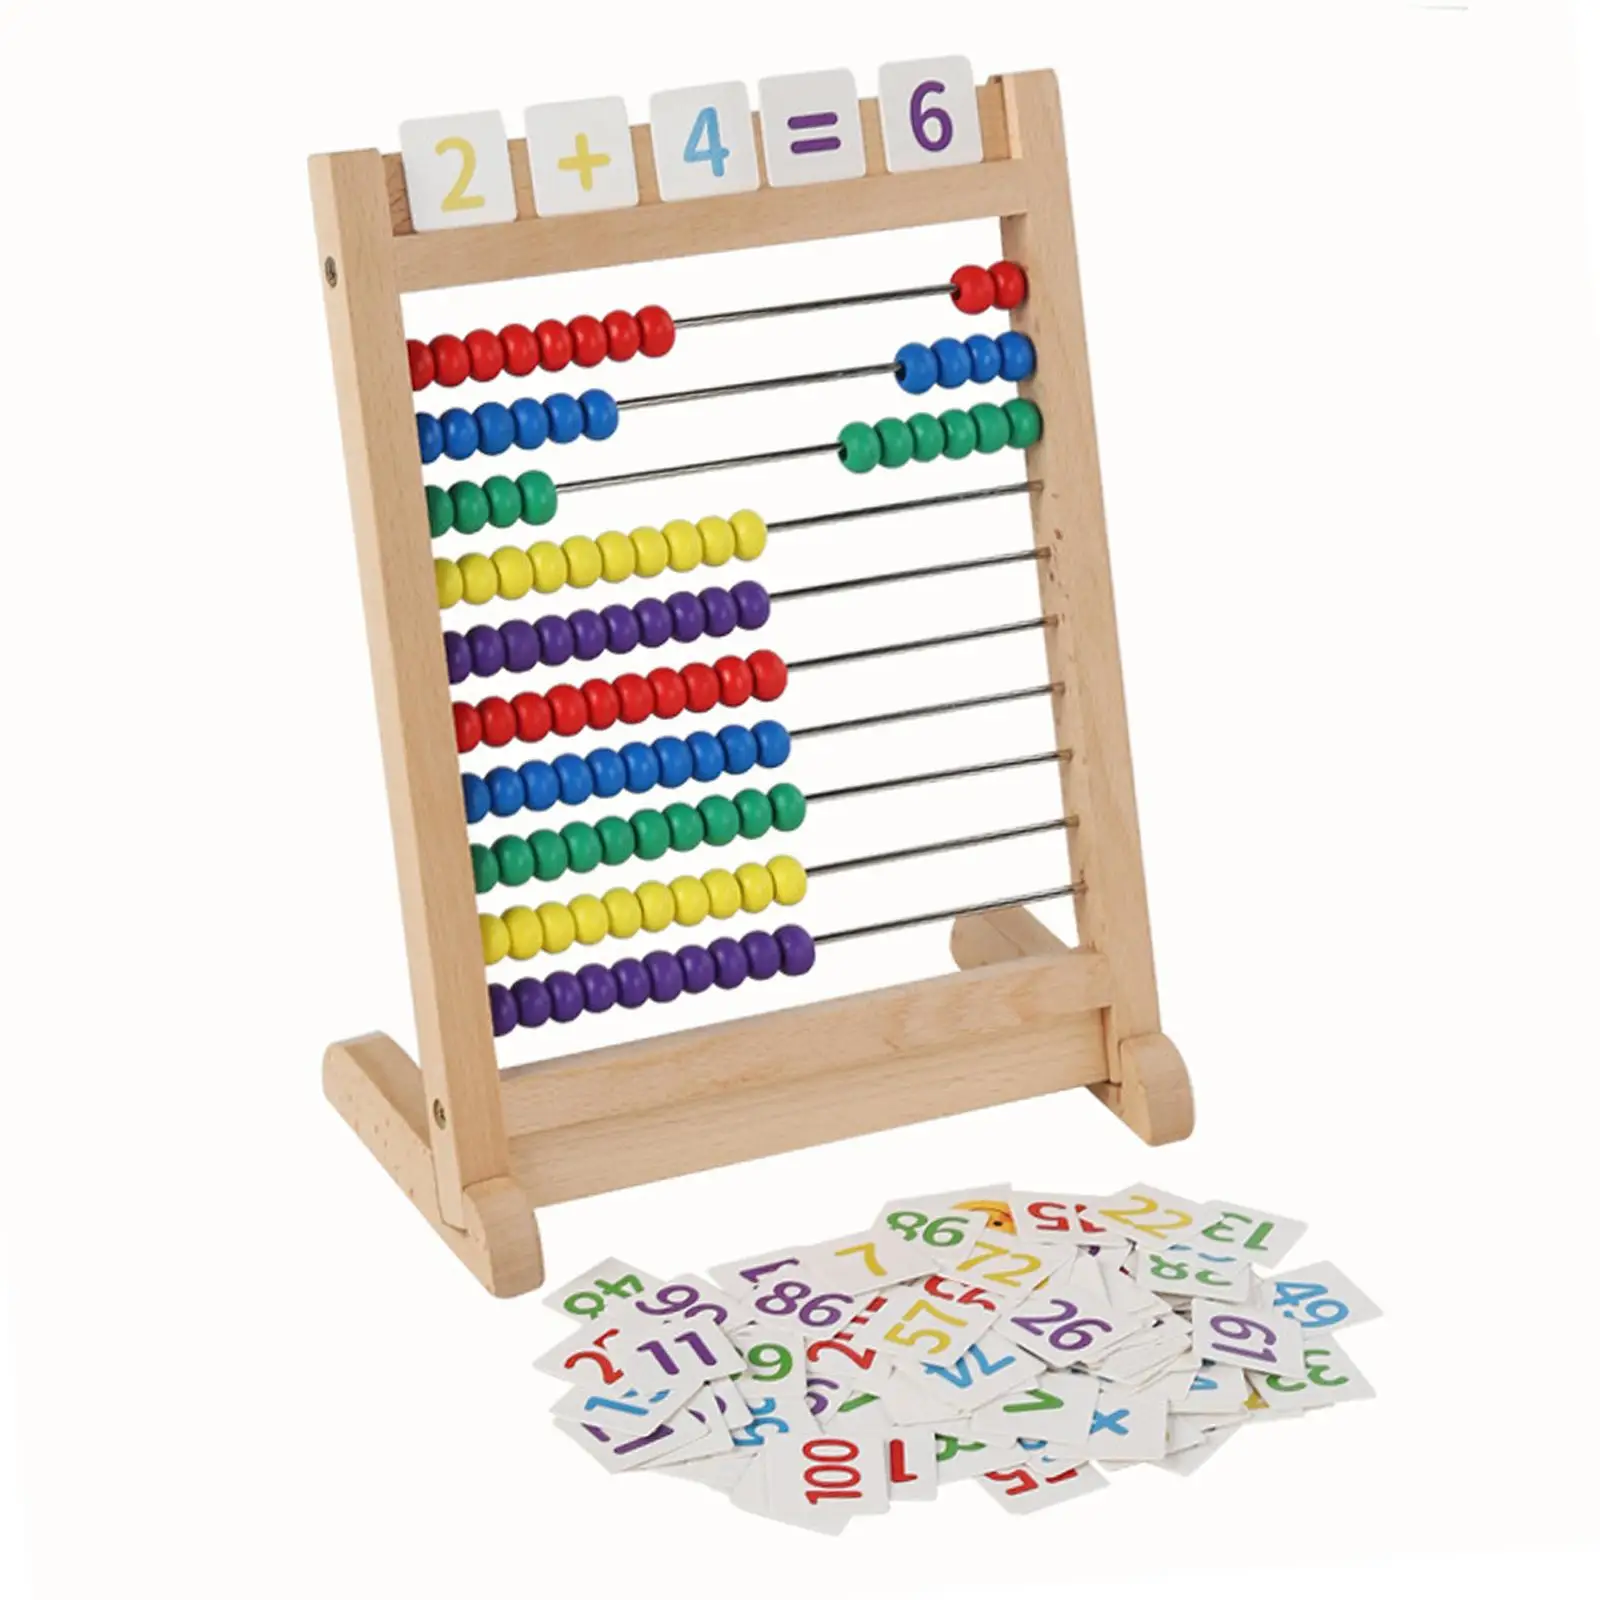 Wooden Abacus Bead Arithmetic Abacus Educational Counting Frames Toy Math Manipulatives for Elementary Interactive Toys